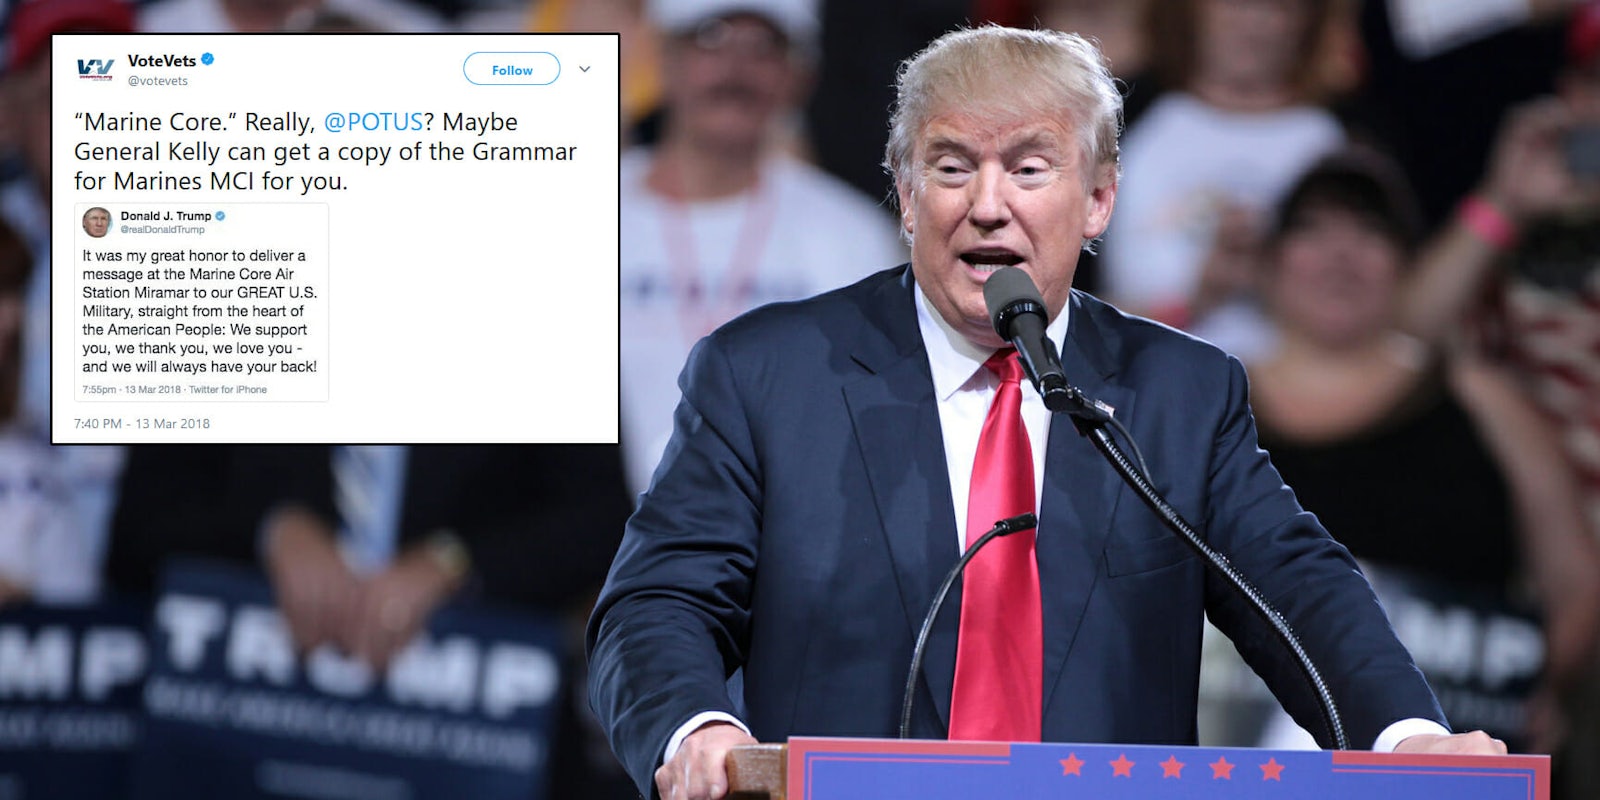 President Donald Trump misspelled 'Marine Corps' on Tuesday night, instead writing 'Marine Core' and Twitter quickly took notice and mocked him.